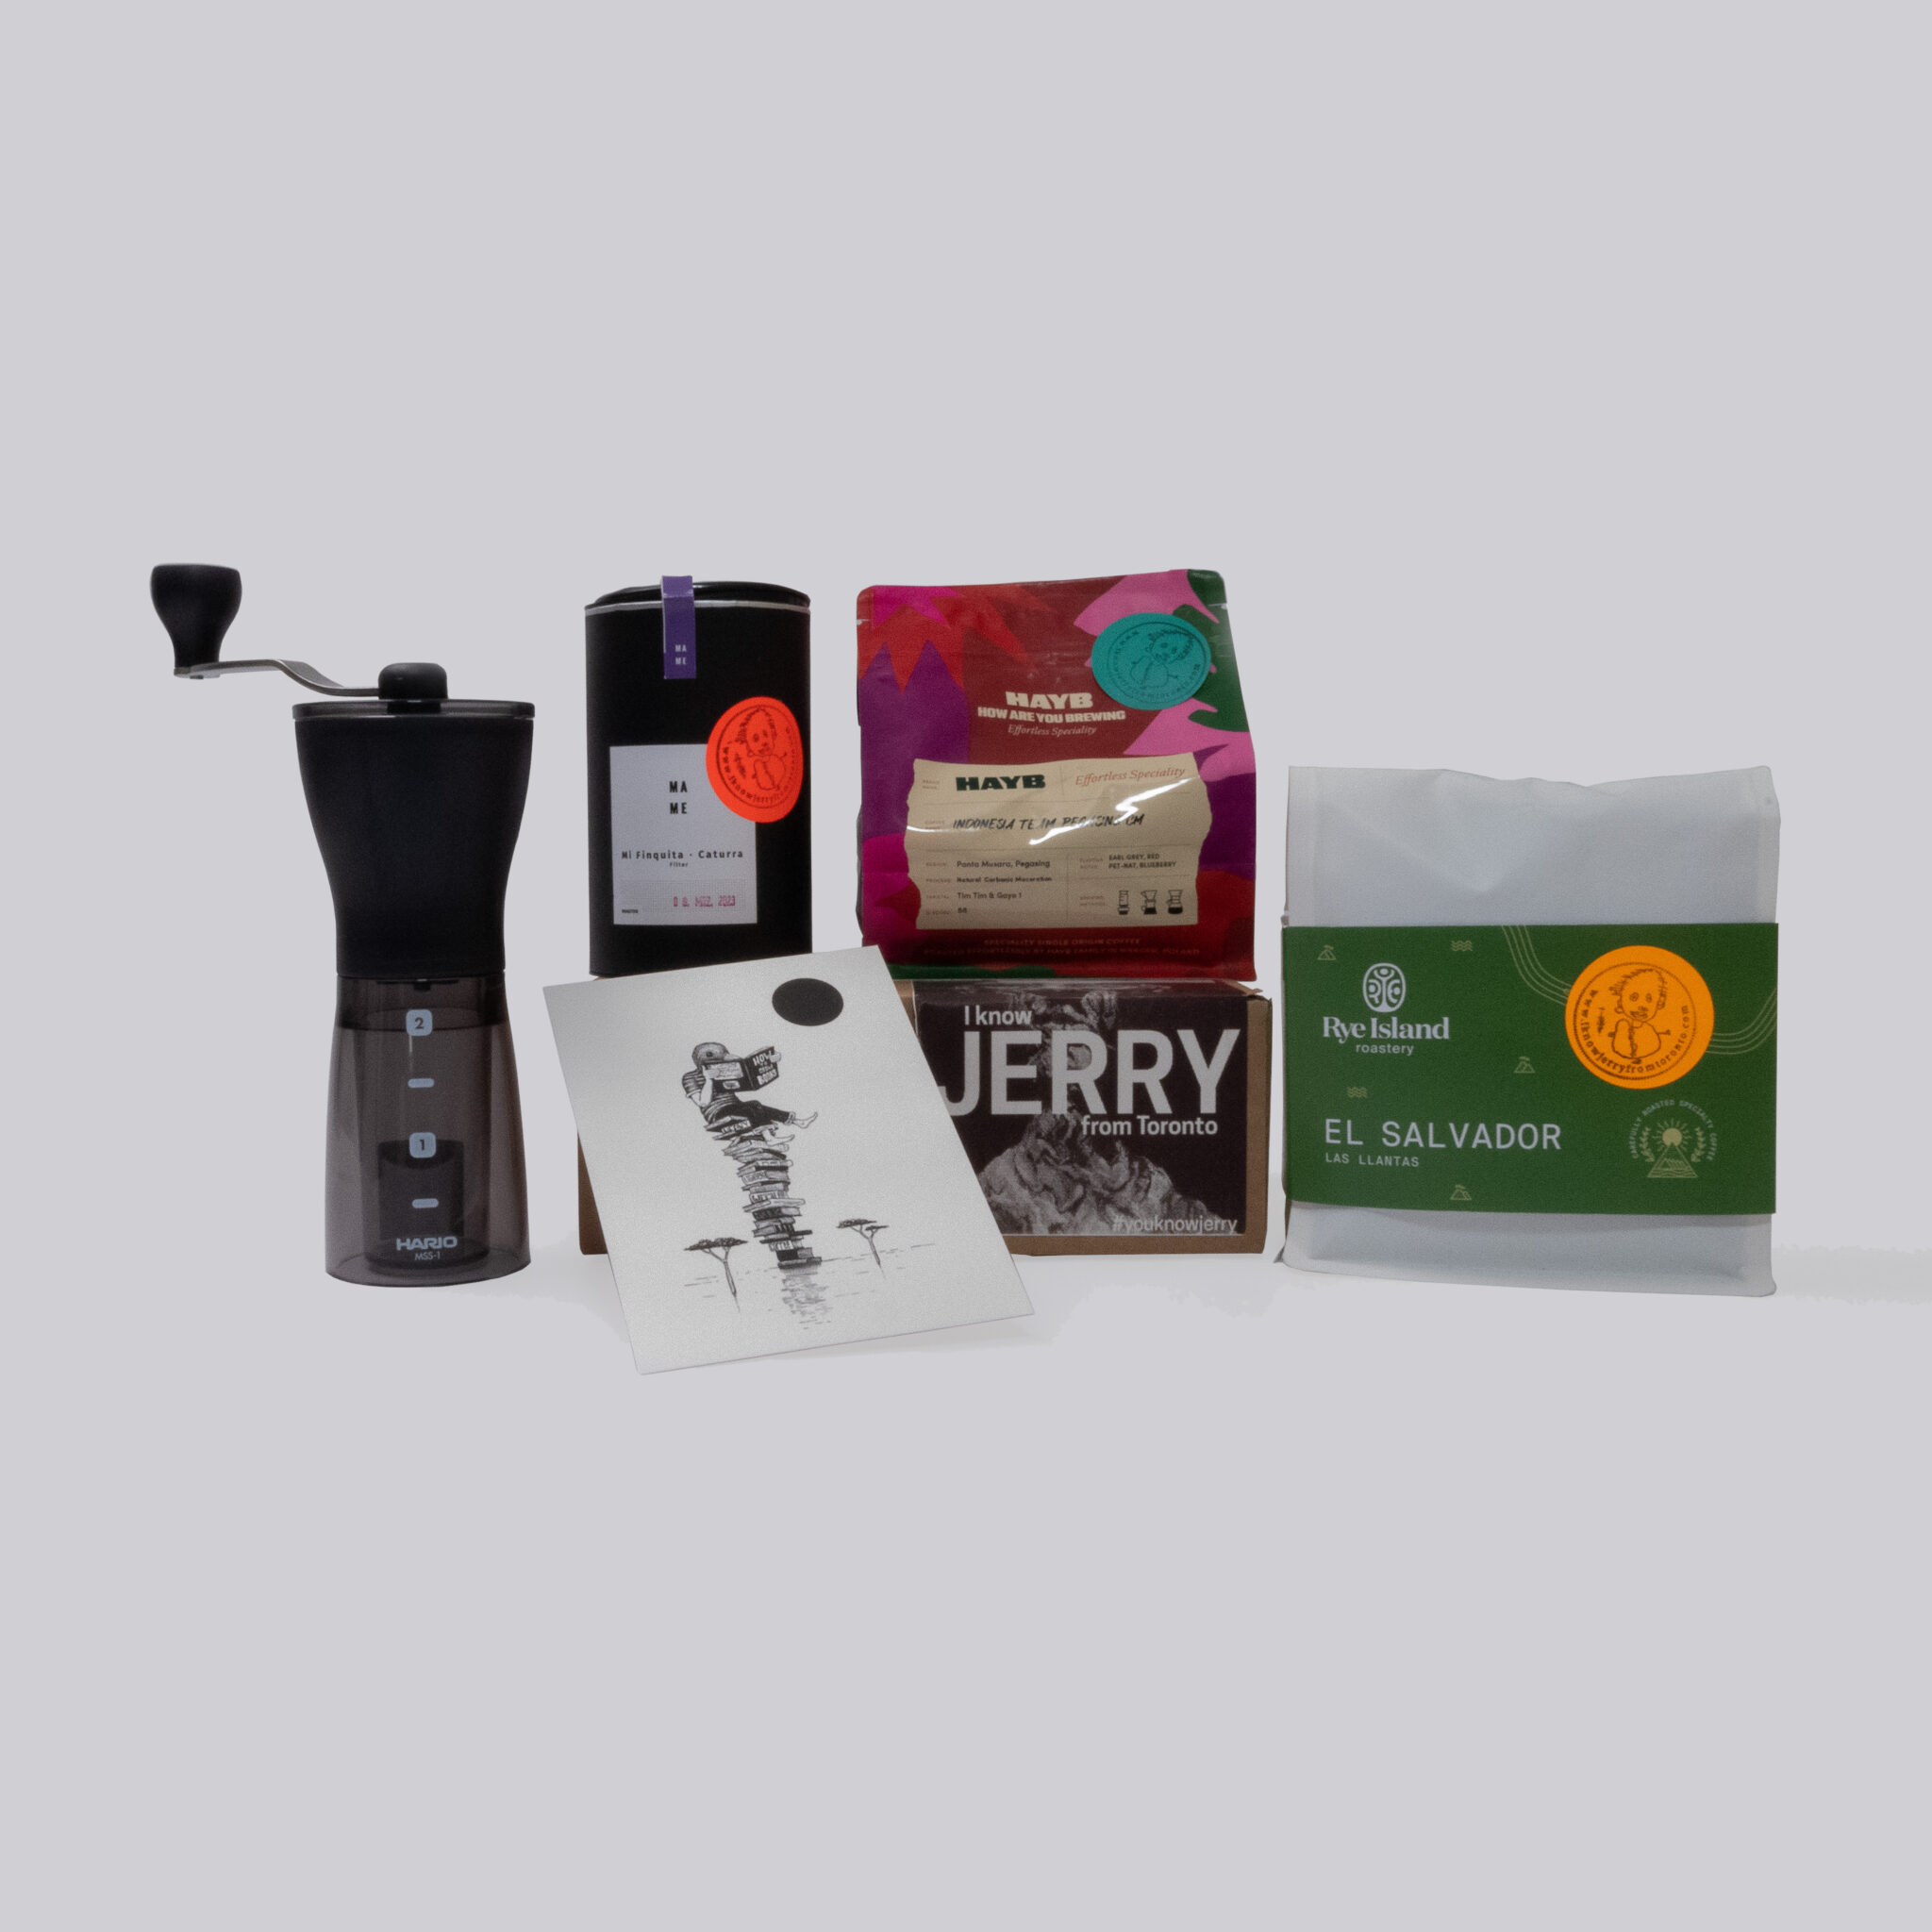 Packshot of the Grinder Box with coffee from Hayb, Rye Island, Mame and an artwork of Gijs Vanhee and a grinder from Hario